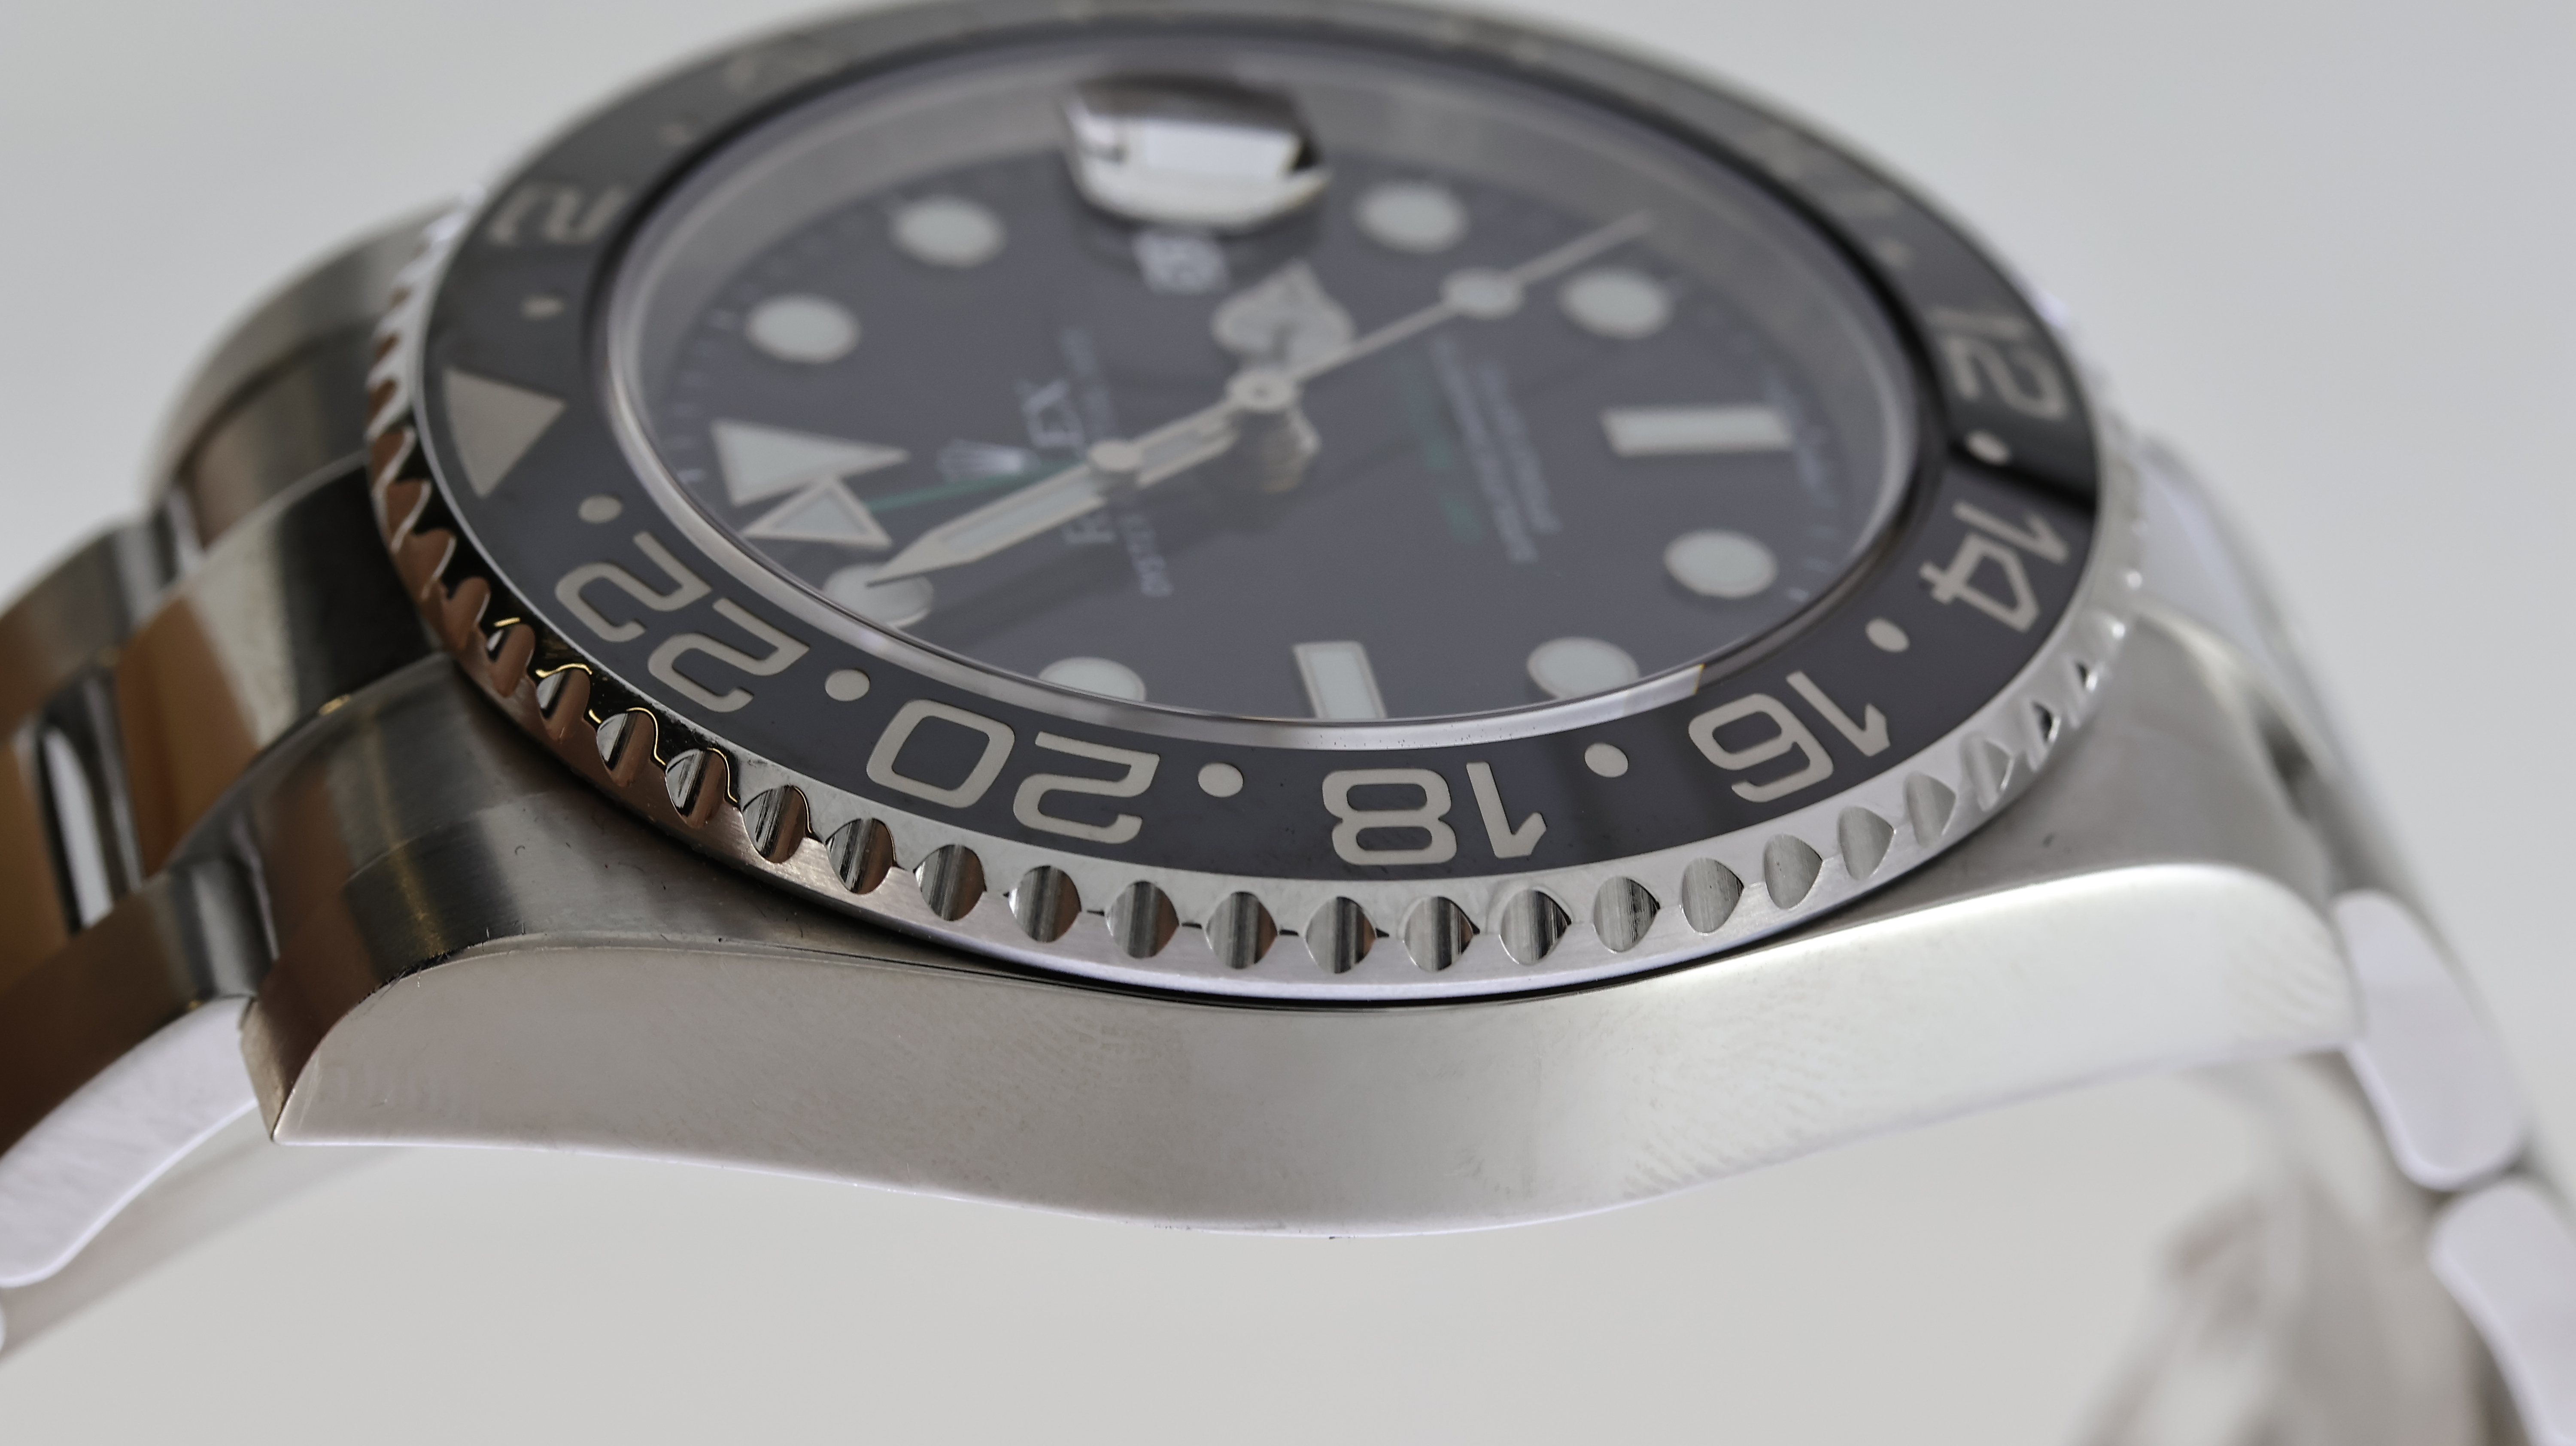 ROLEX GMT MASTER II REFERENCE 116710 - Image 5 of 10